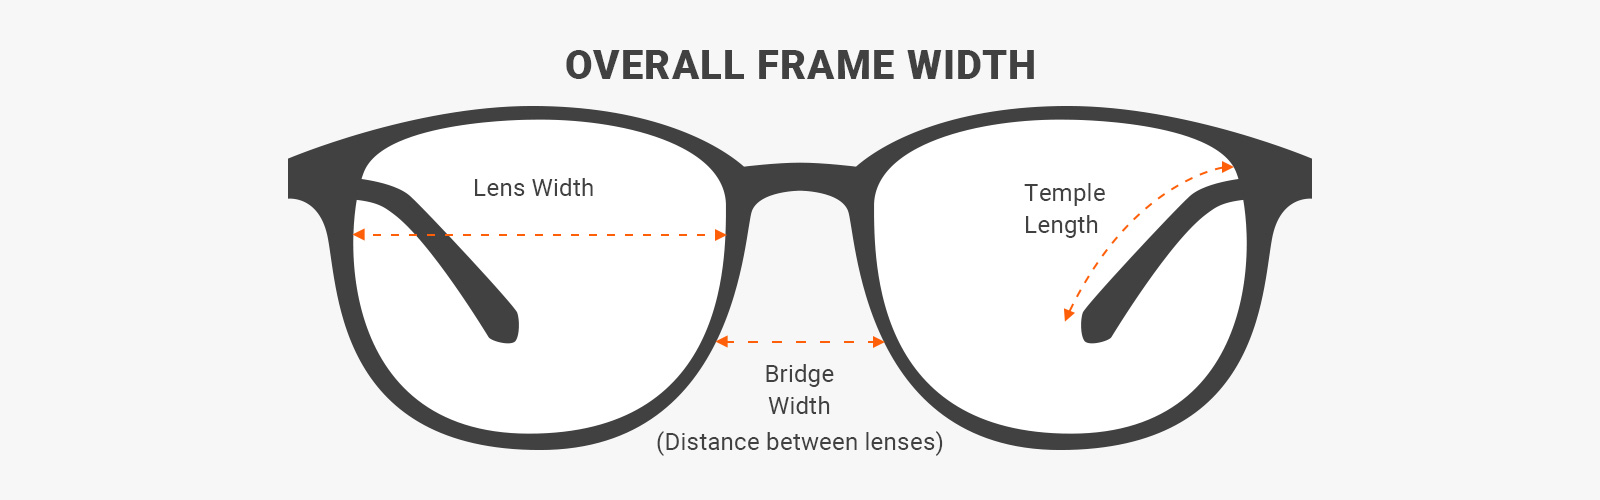 how to read glasses measurements - what is lens width, bridge width and temple lenght